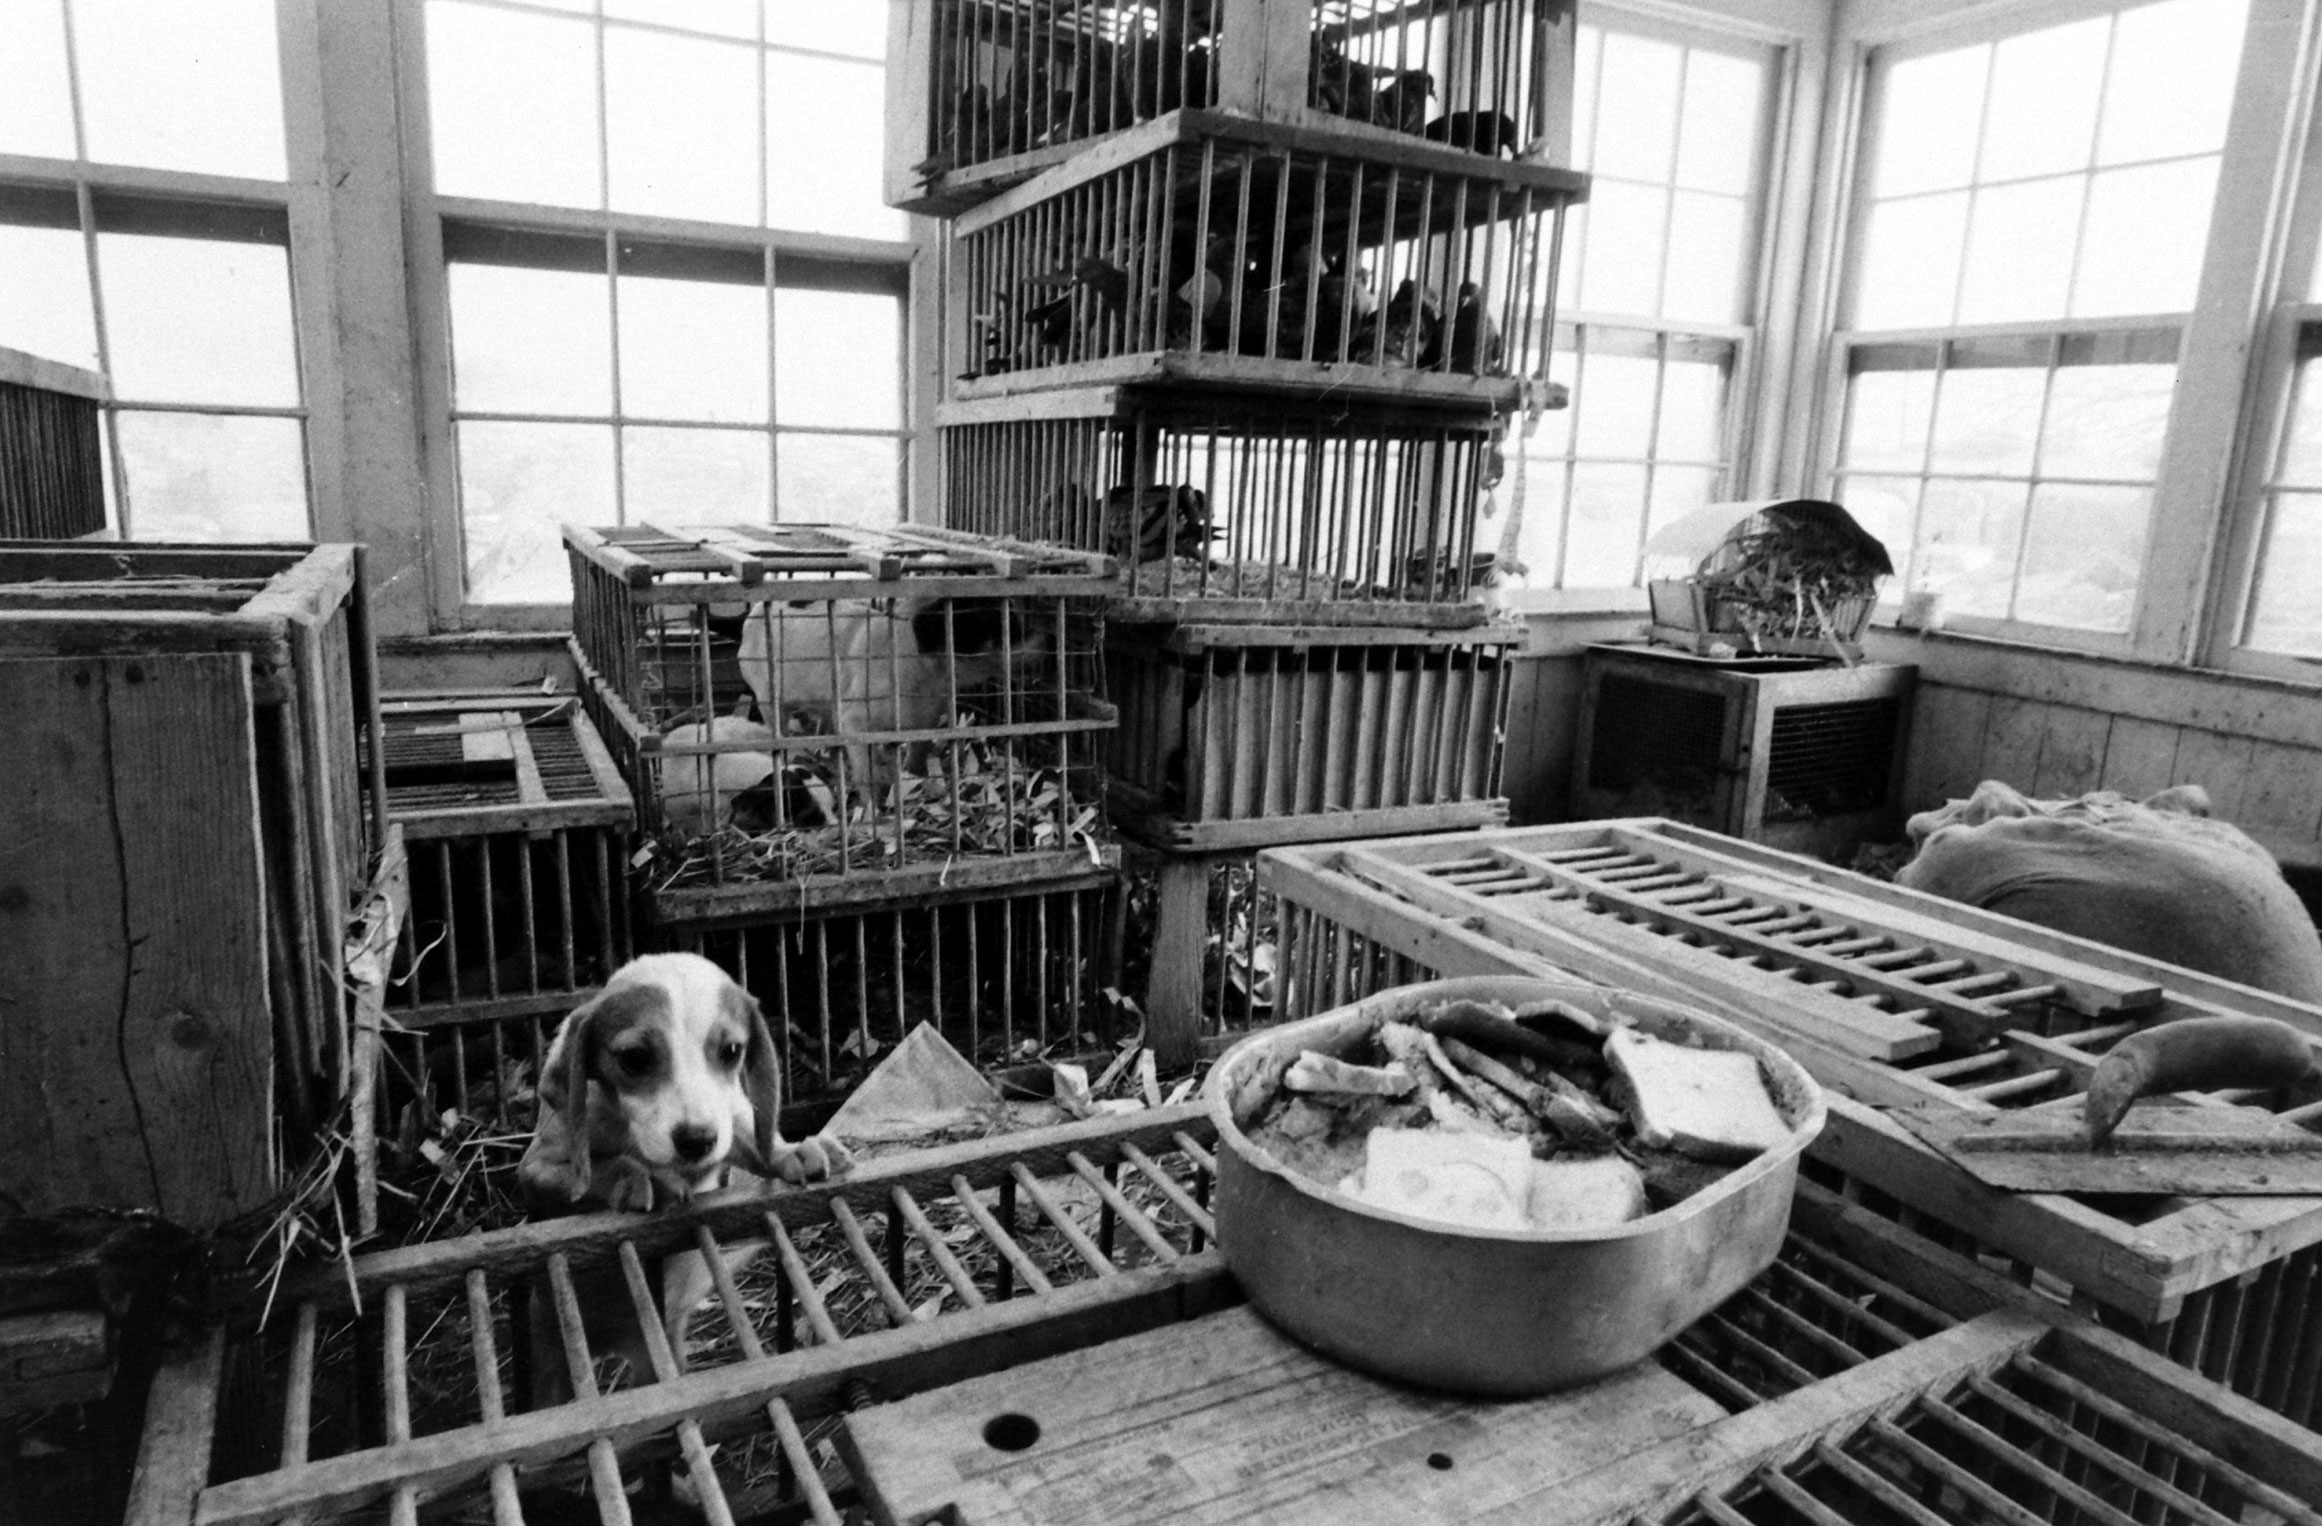 In a shed behind [dog dealer Lester] Brown's house, dogs, pigeons and other creatures were jammed into filthy coops. The only food in sight was the stale bread piled in a washtub.